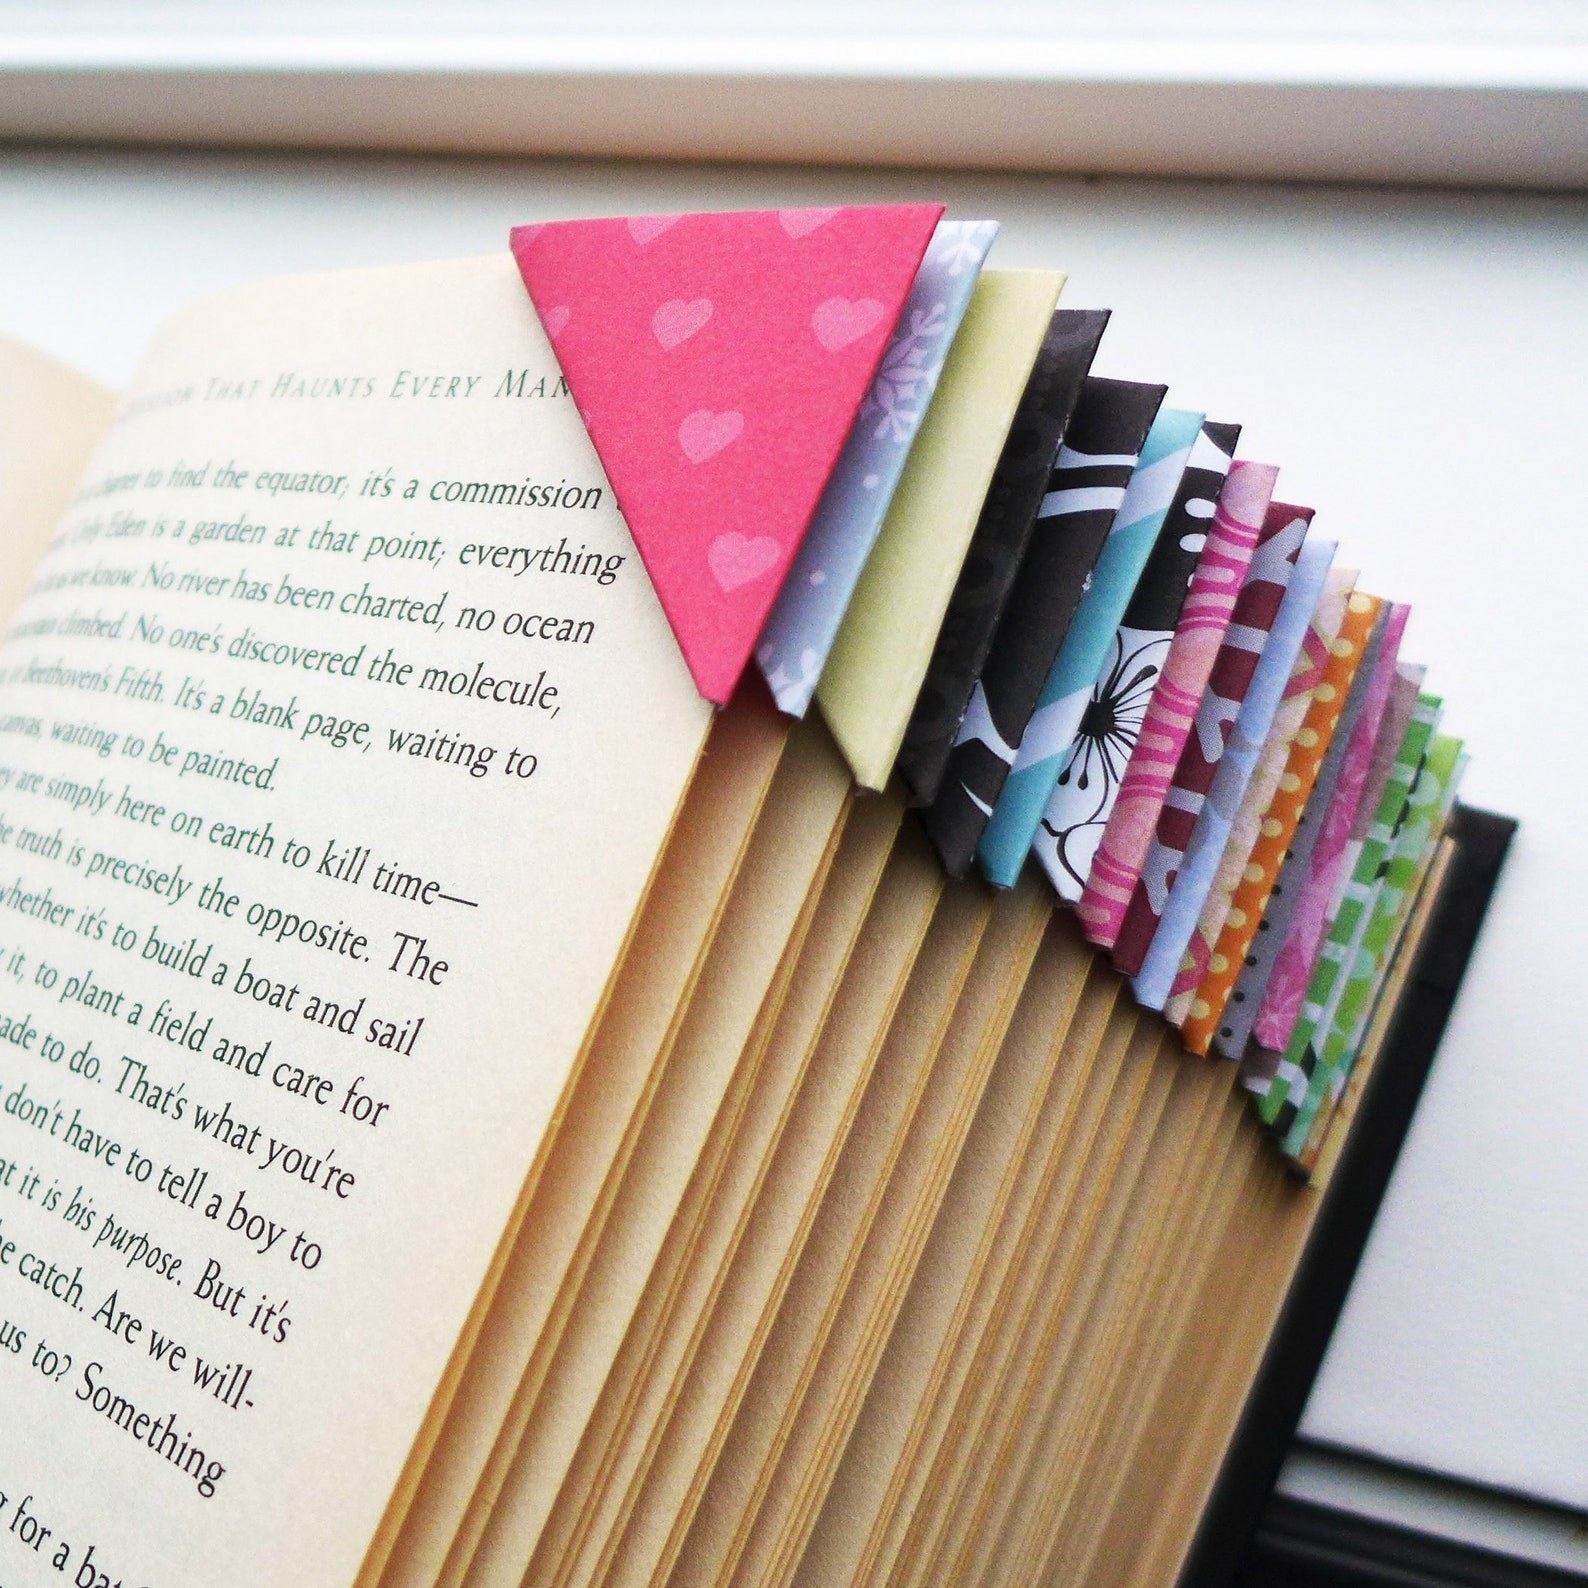 A variety of the bookmarks placed on the corner of a book